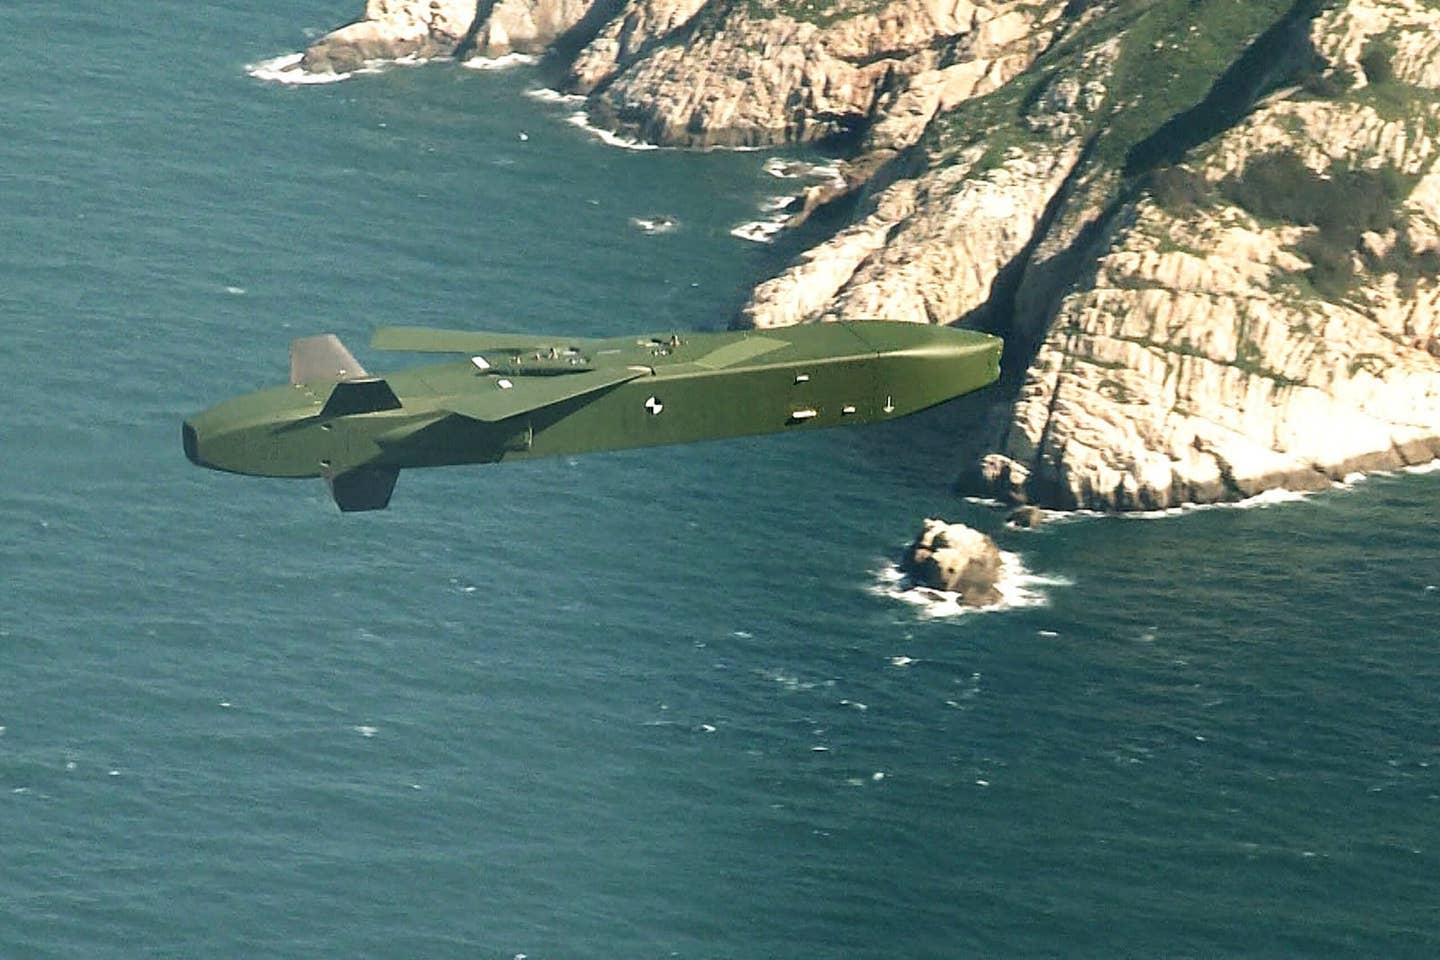 A Taurus missile in flight, with the pop-out wings above the body seen deployed. <em>Photo by South Korean Defense Ministry via Getty Images</em>